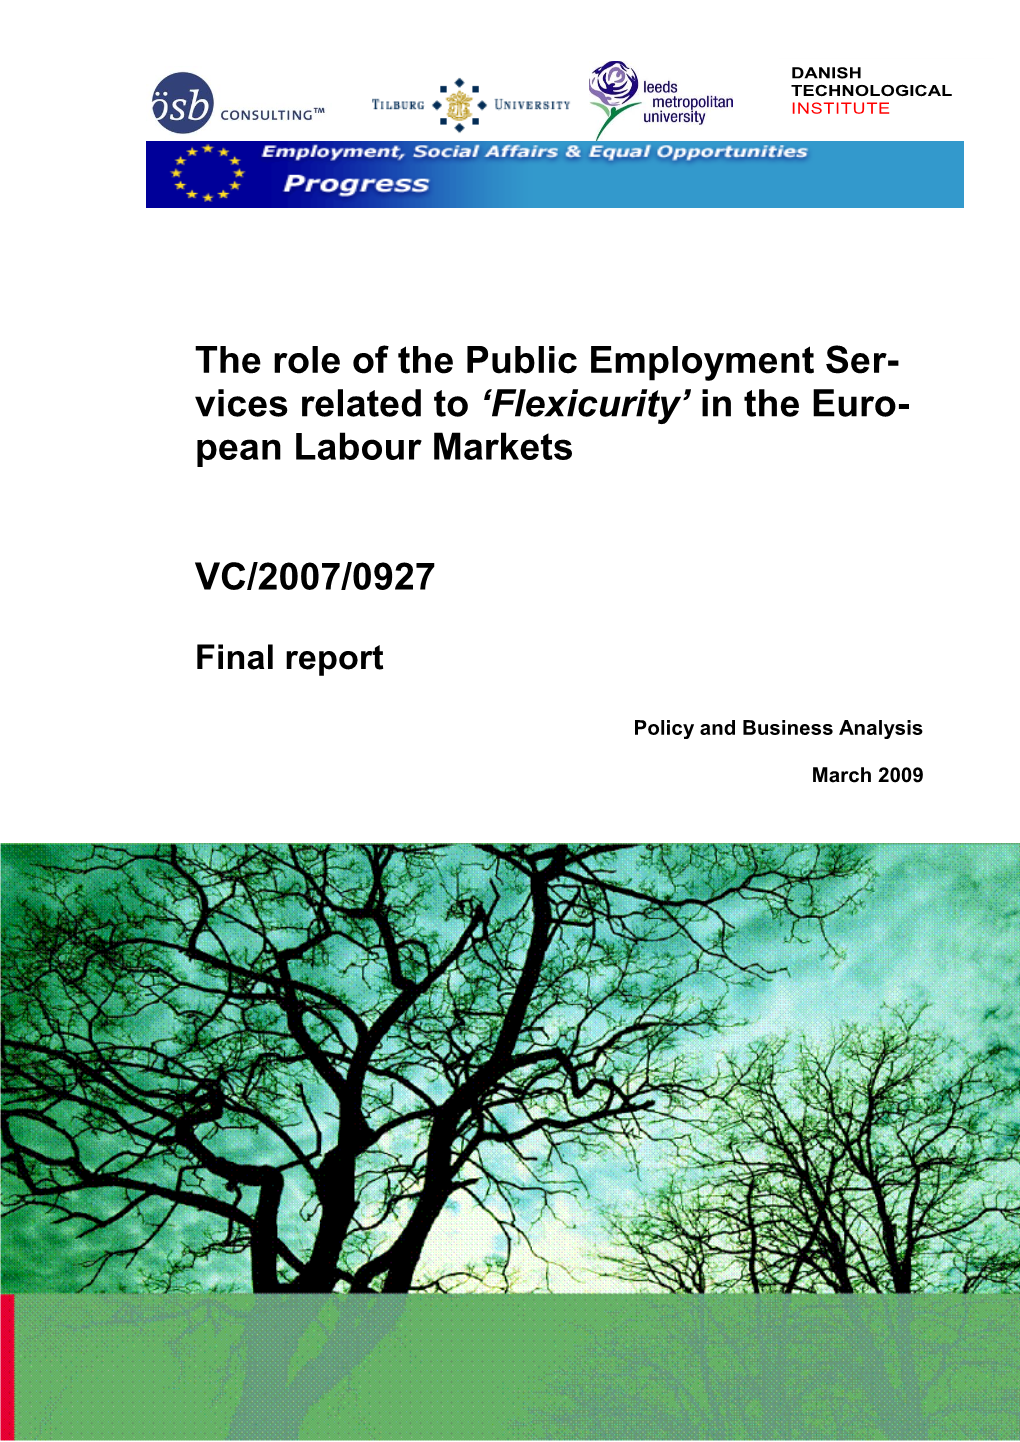 Related to Flexicurity in the European Labour Markets